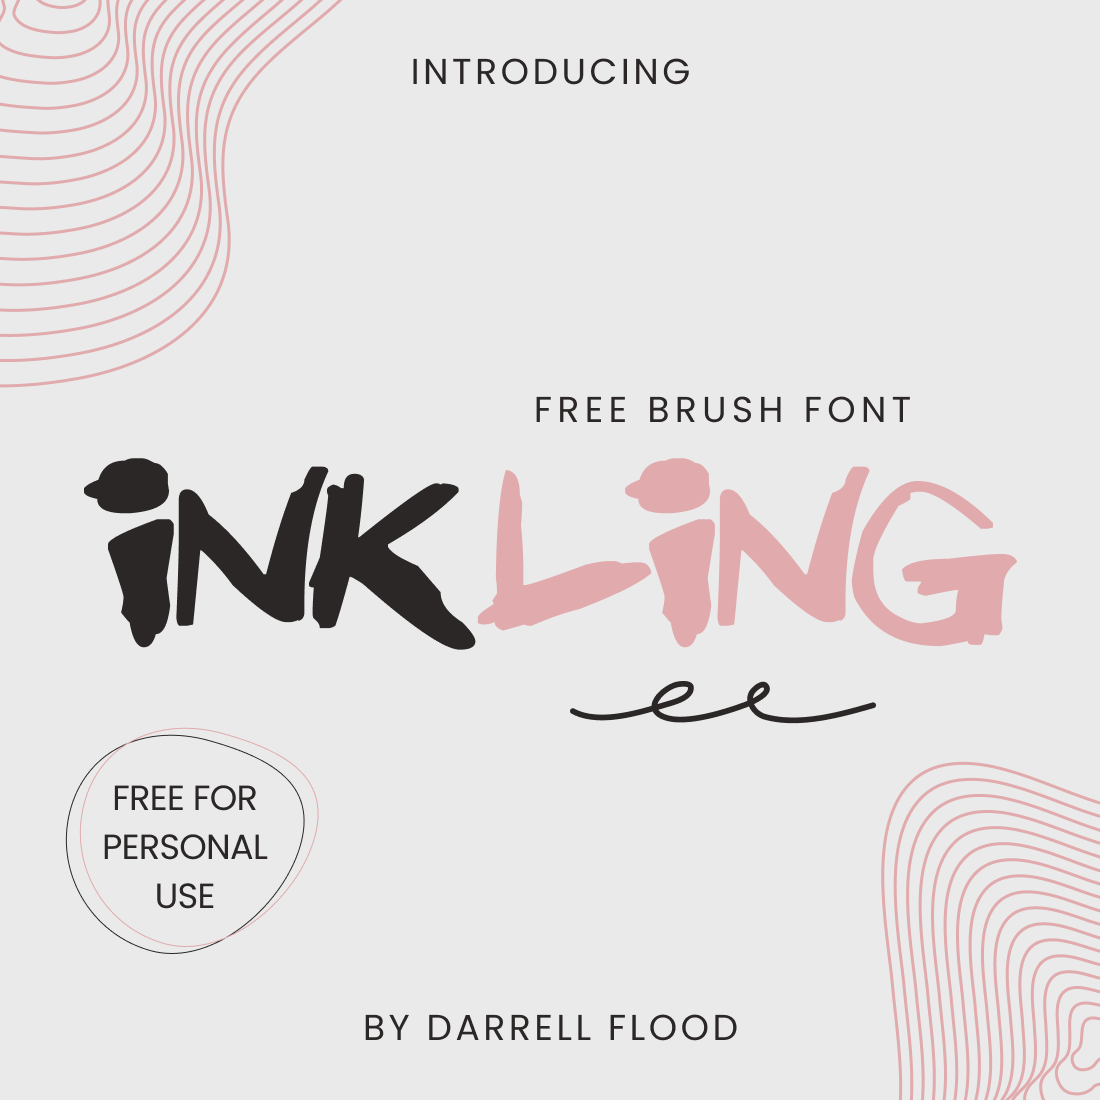 Inkling Ink Free Font cool main cover by MasterBundles.